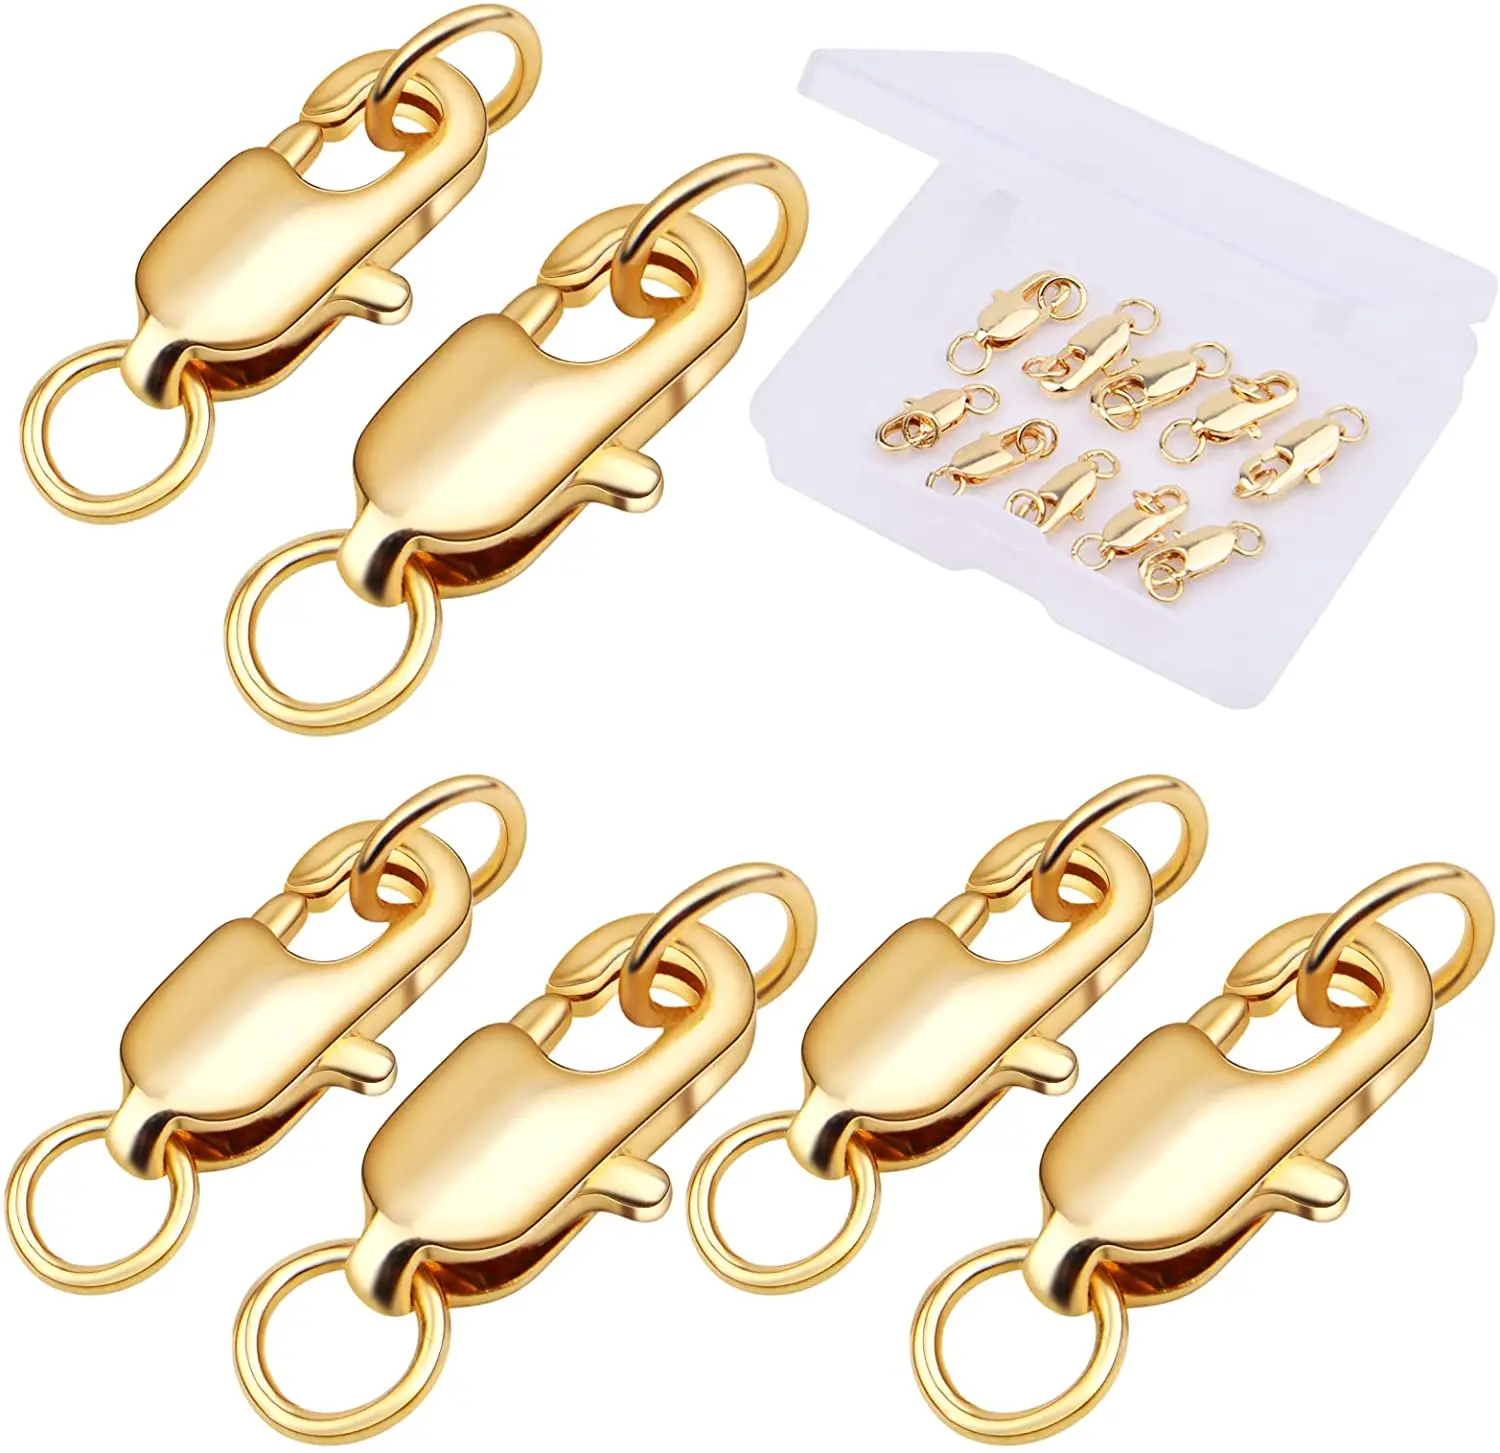 

10pcs 2 Sizes Necklace Clasp Metal Lobster Claw Clasps Connectors with Open Jump Rings and a Box for DIY Jewelry Making, Golden